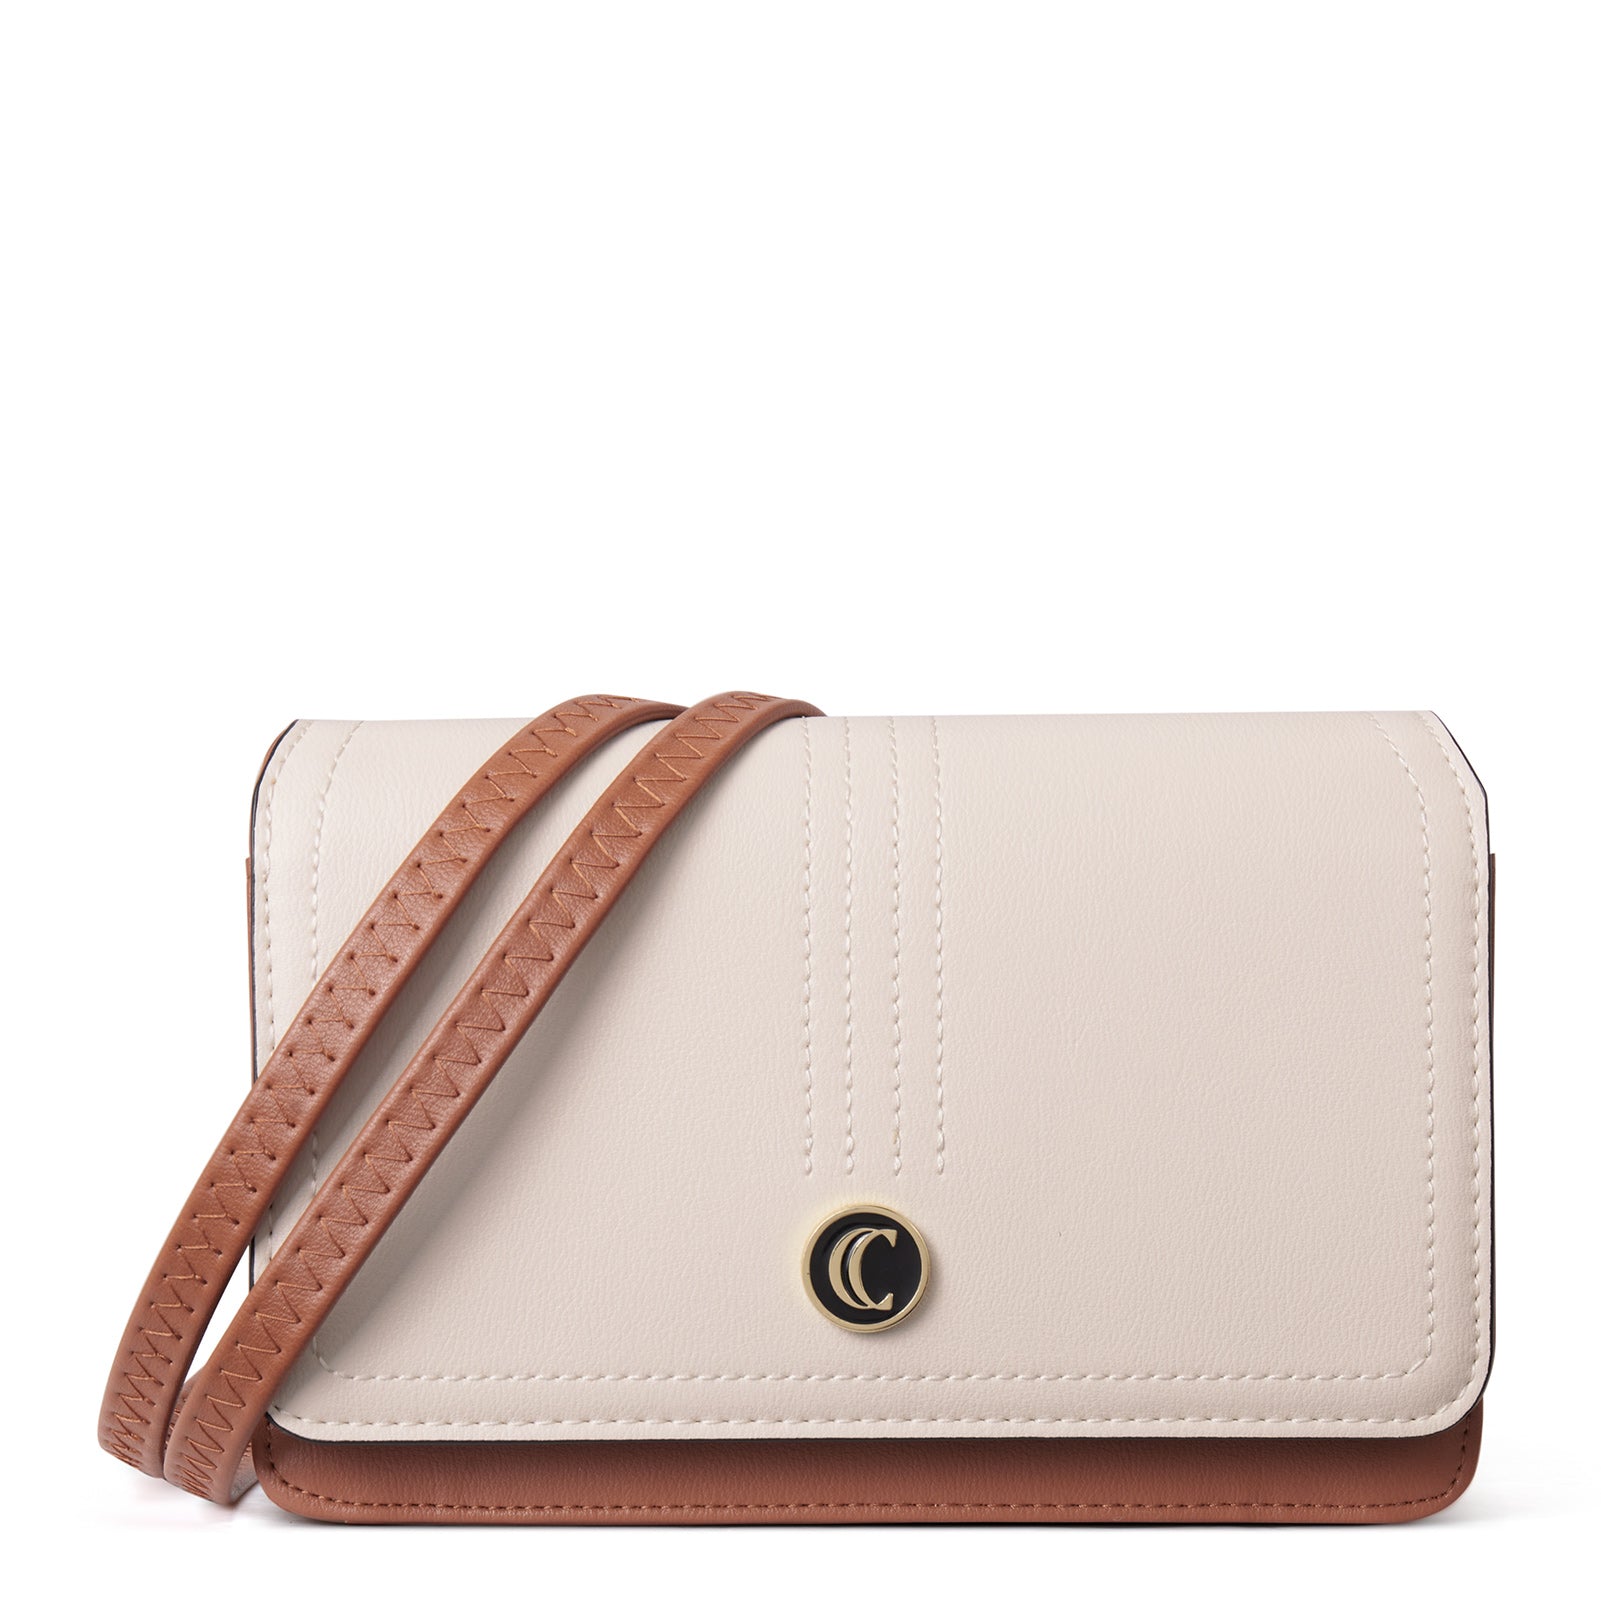 CLUCI Crossbody Purse for Women, Wristlet Wallet, Small Shoulder Bag with Card Slots, Leather Flap Cell phone Clutch